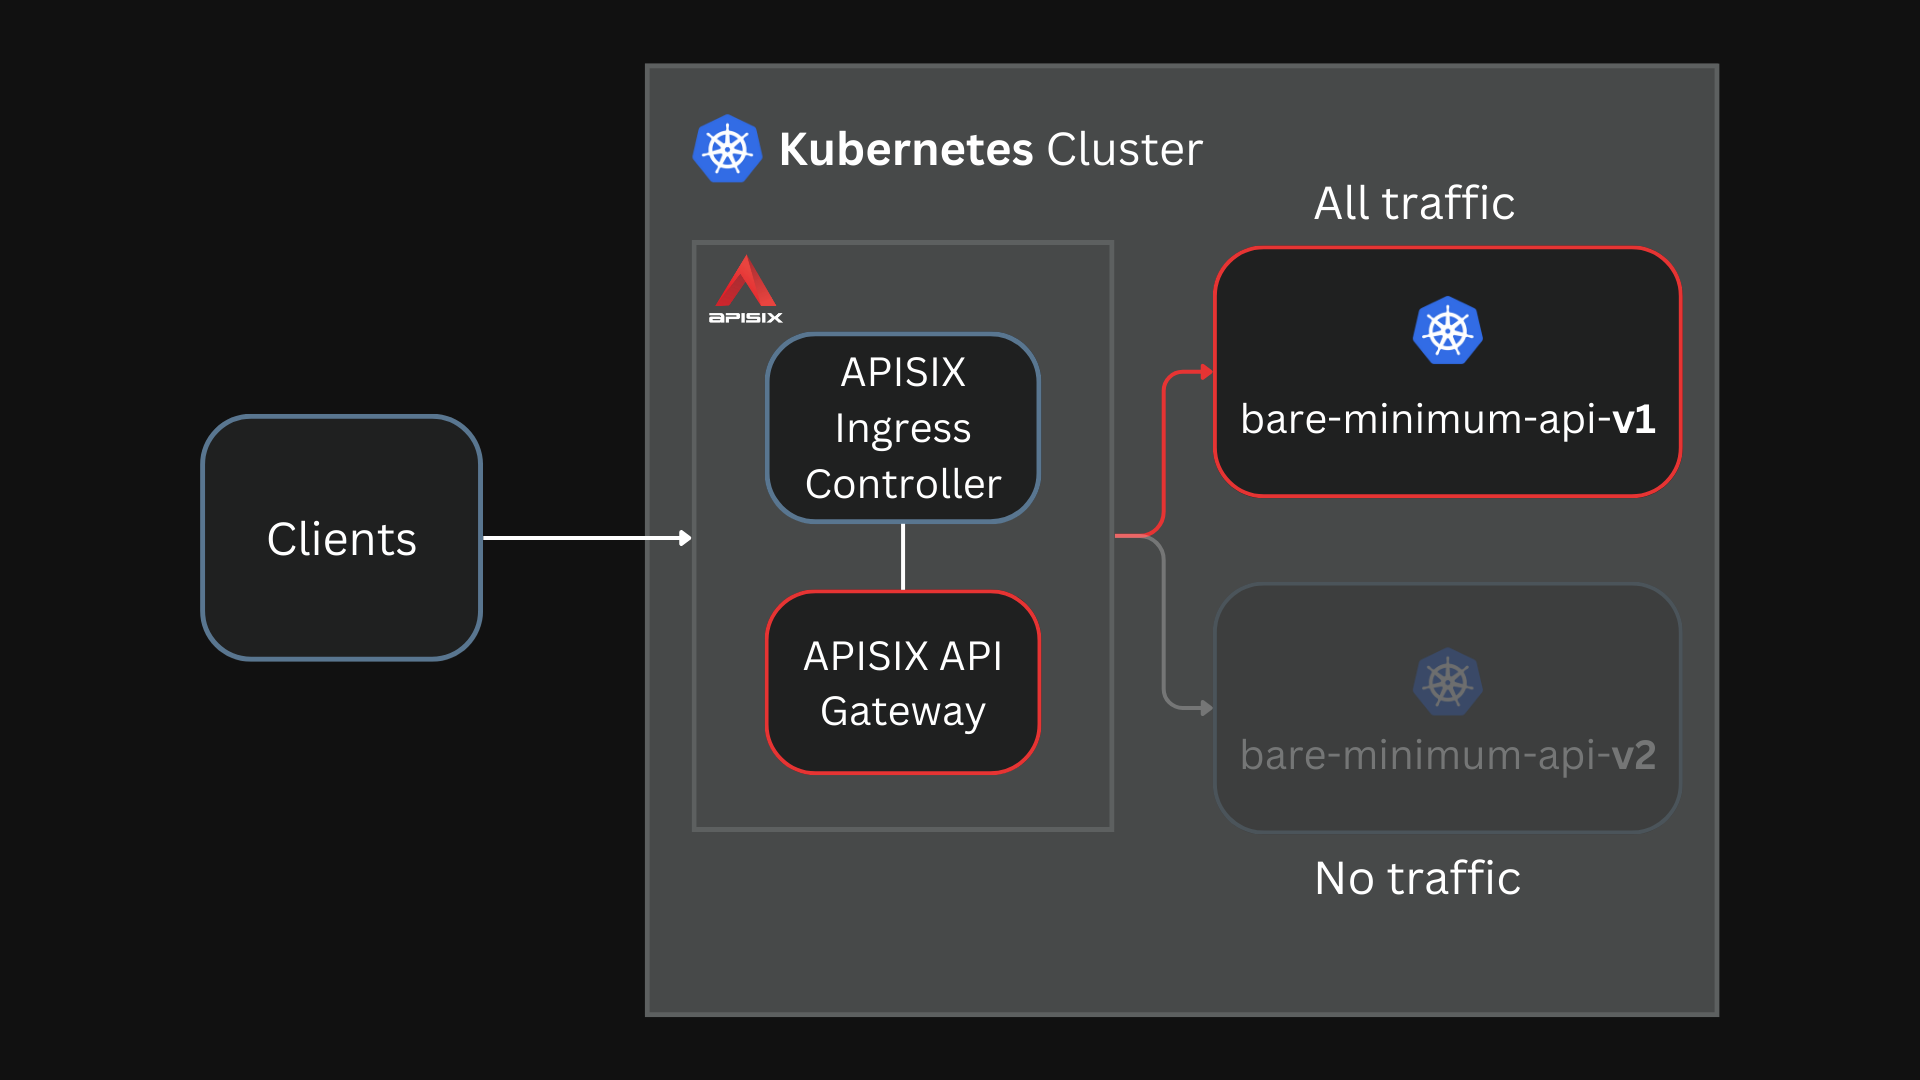 Route all requests to bare-minimum-api-v1